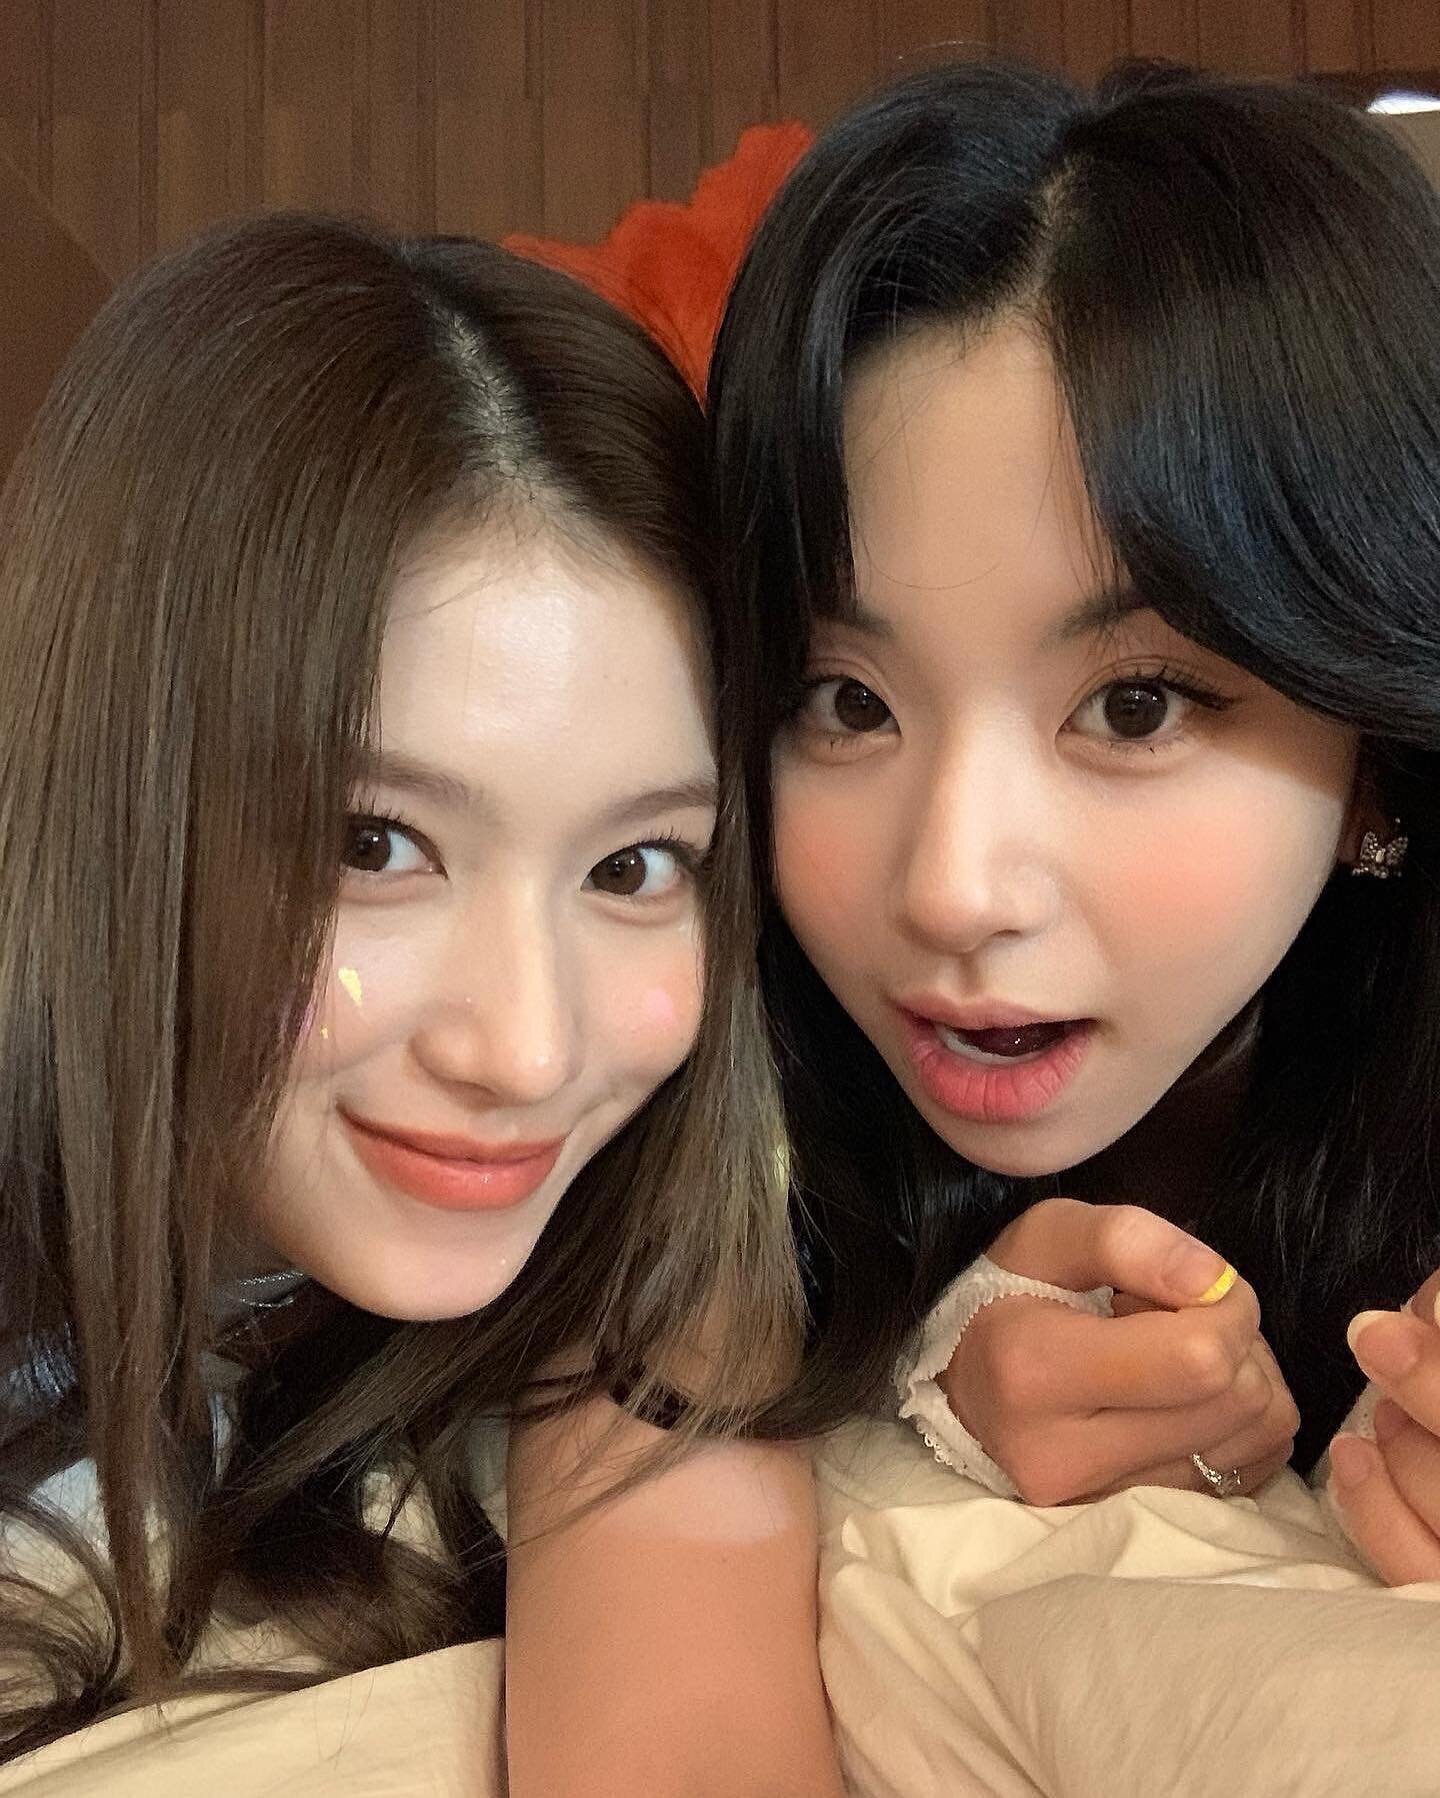 220718-TWICE-Sana-Instagram-Update-with-Chaeyoung-documents-1.jpeg?v=d7ac7